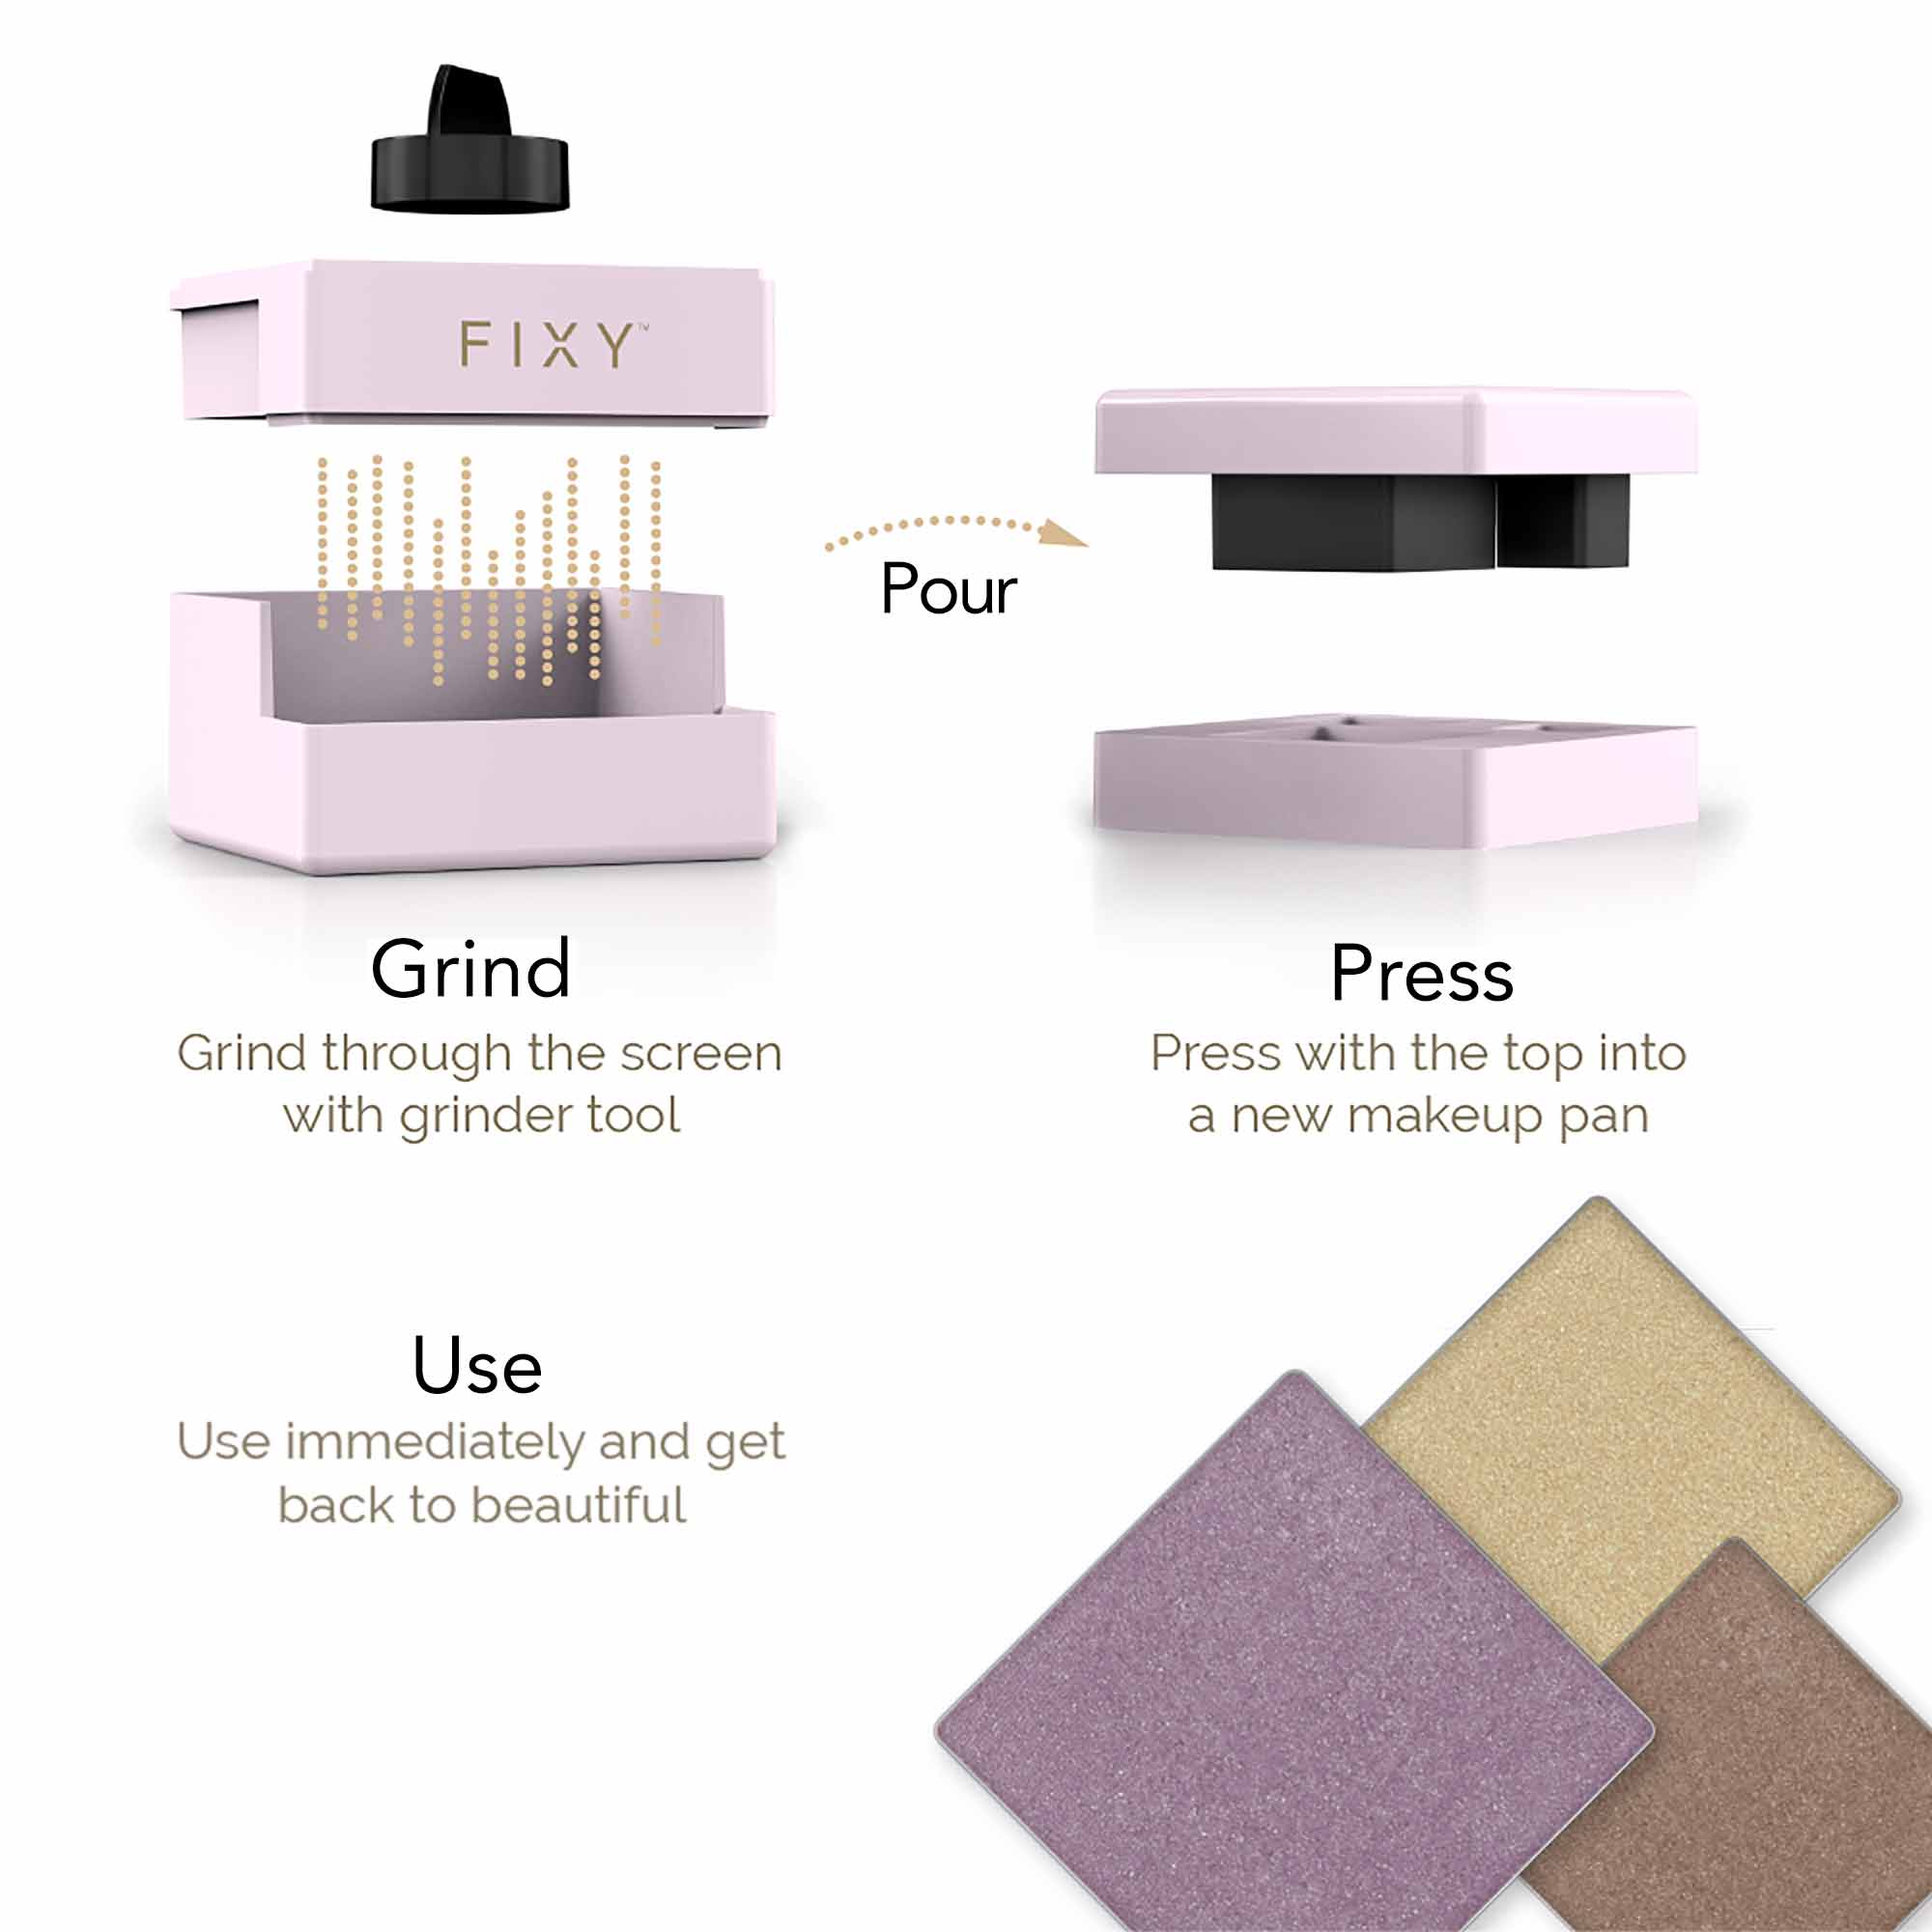 Step-by-step illustration of the FIXY Makeup Repressing Kit. &#39;Grind&#39; step showing grinding of makeup, &#39;Pour&#39; indicates transferring makeup to a pan, &#39;Press&#39; step depicts pressing makeup into the pan, and &#39;Use&#39; shows the finished pressed makeup pans ready for application.